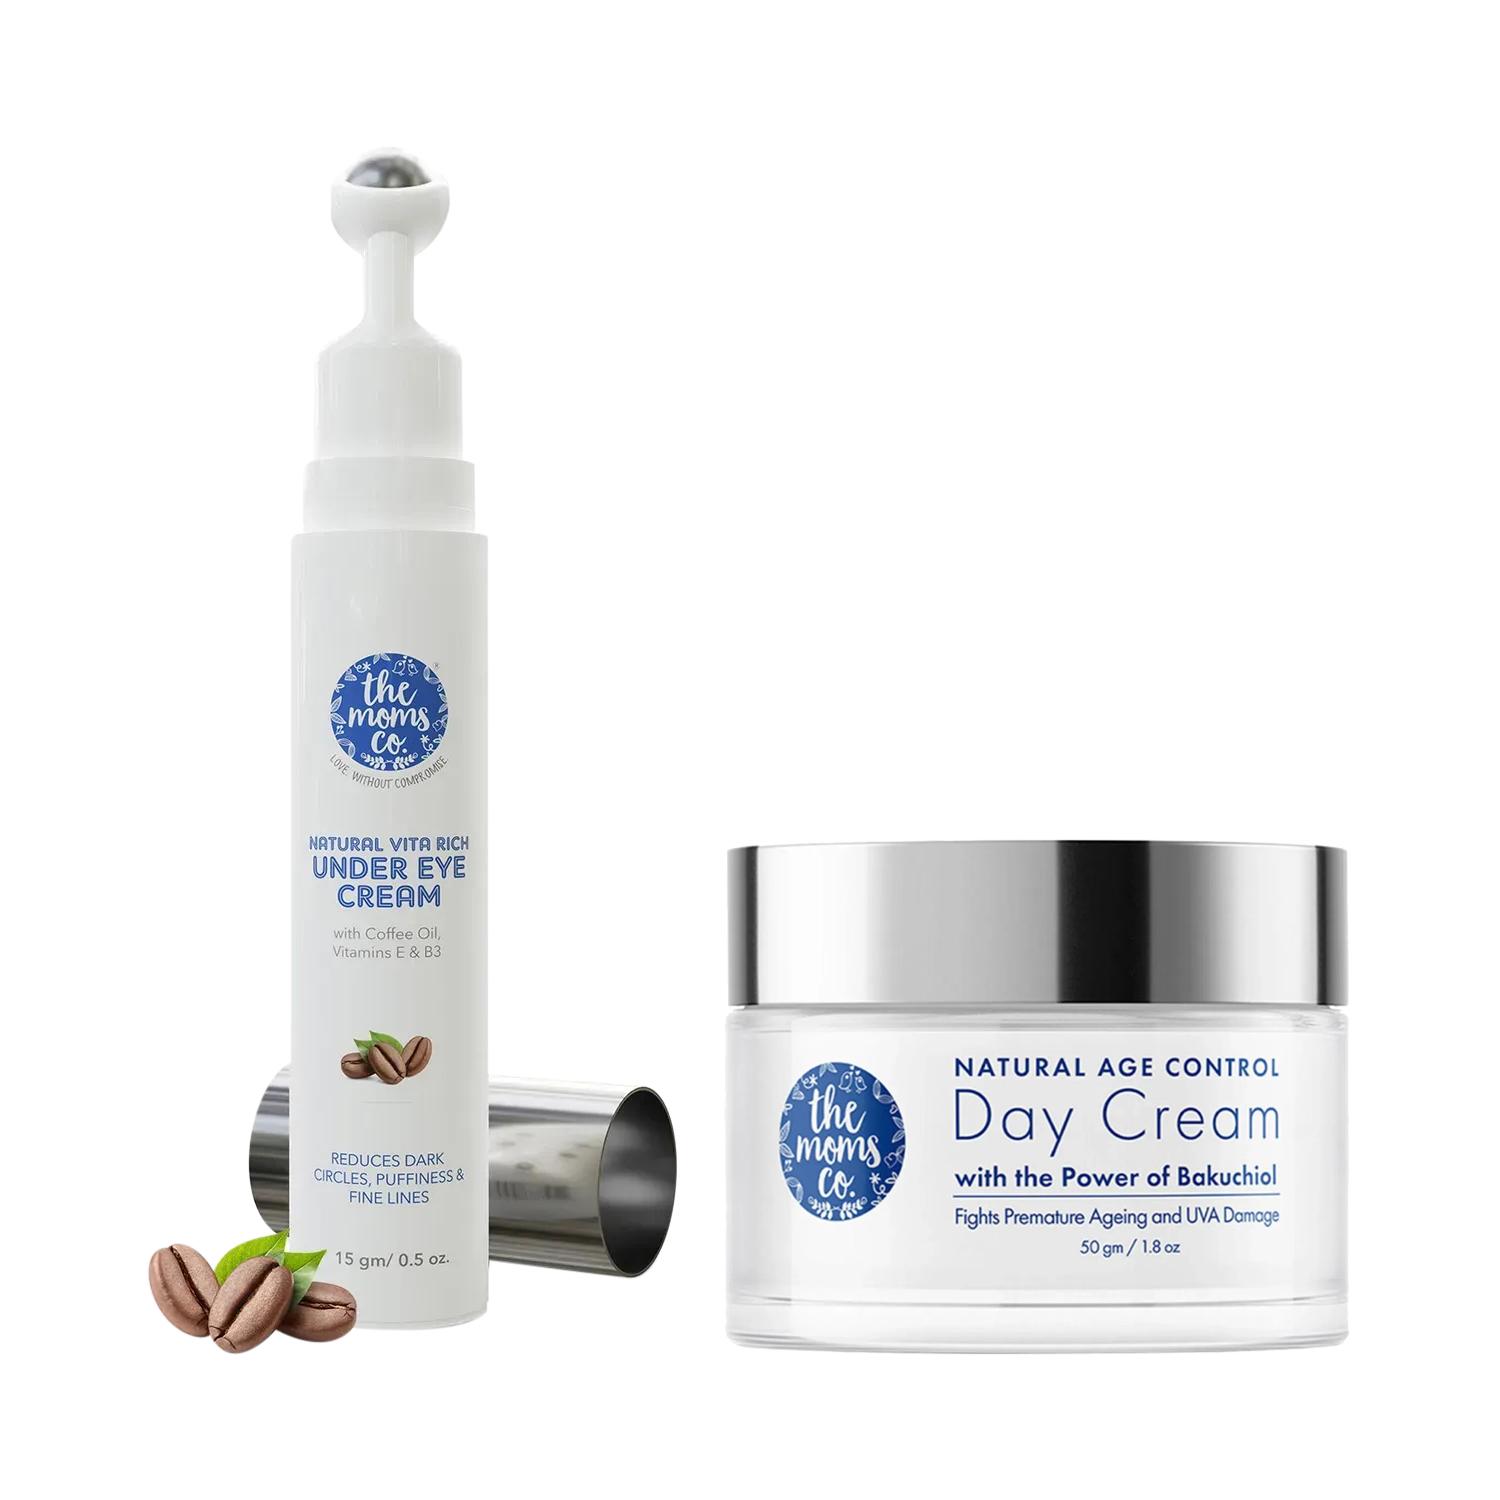 The Mom's Co. | The Mom's Co. Vita Rich Under Eye Cream with Coffee Oil & Natural Age Control Day Cream (50g) Combo